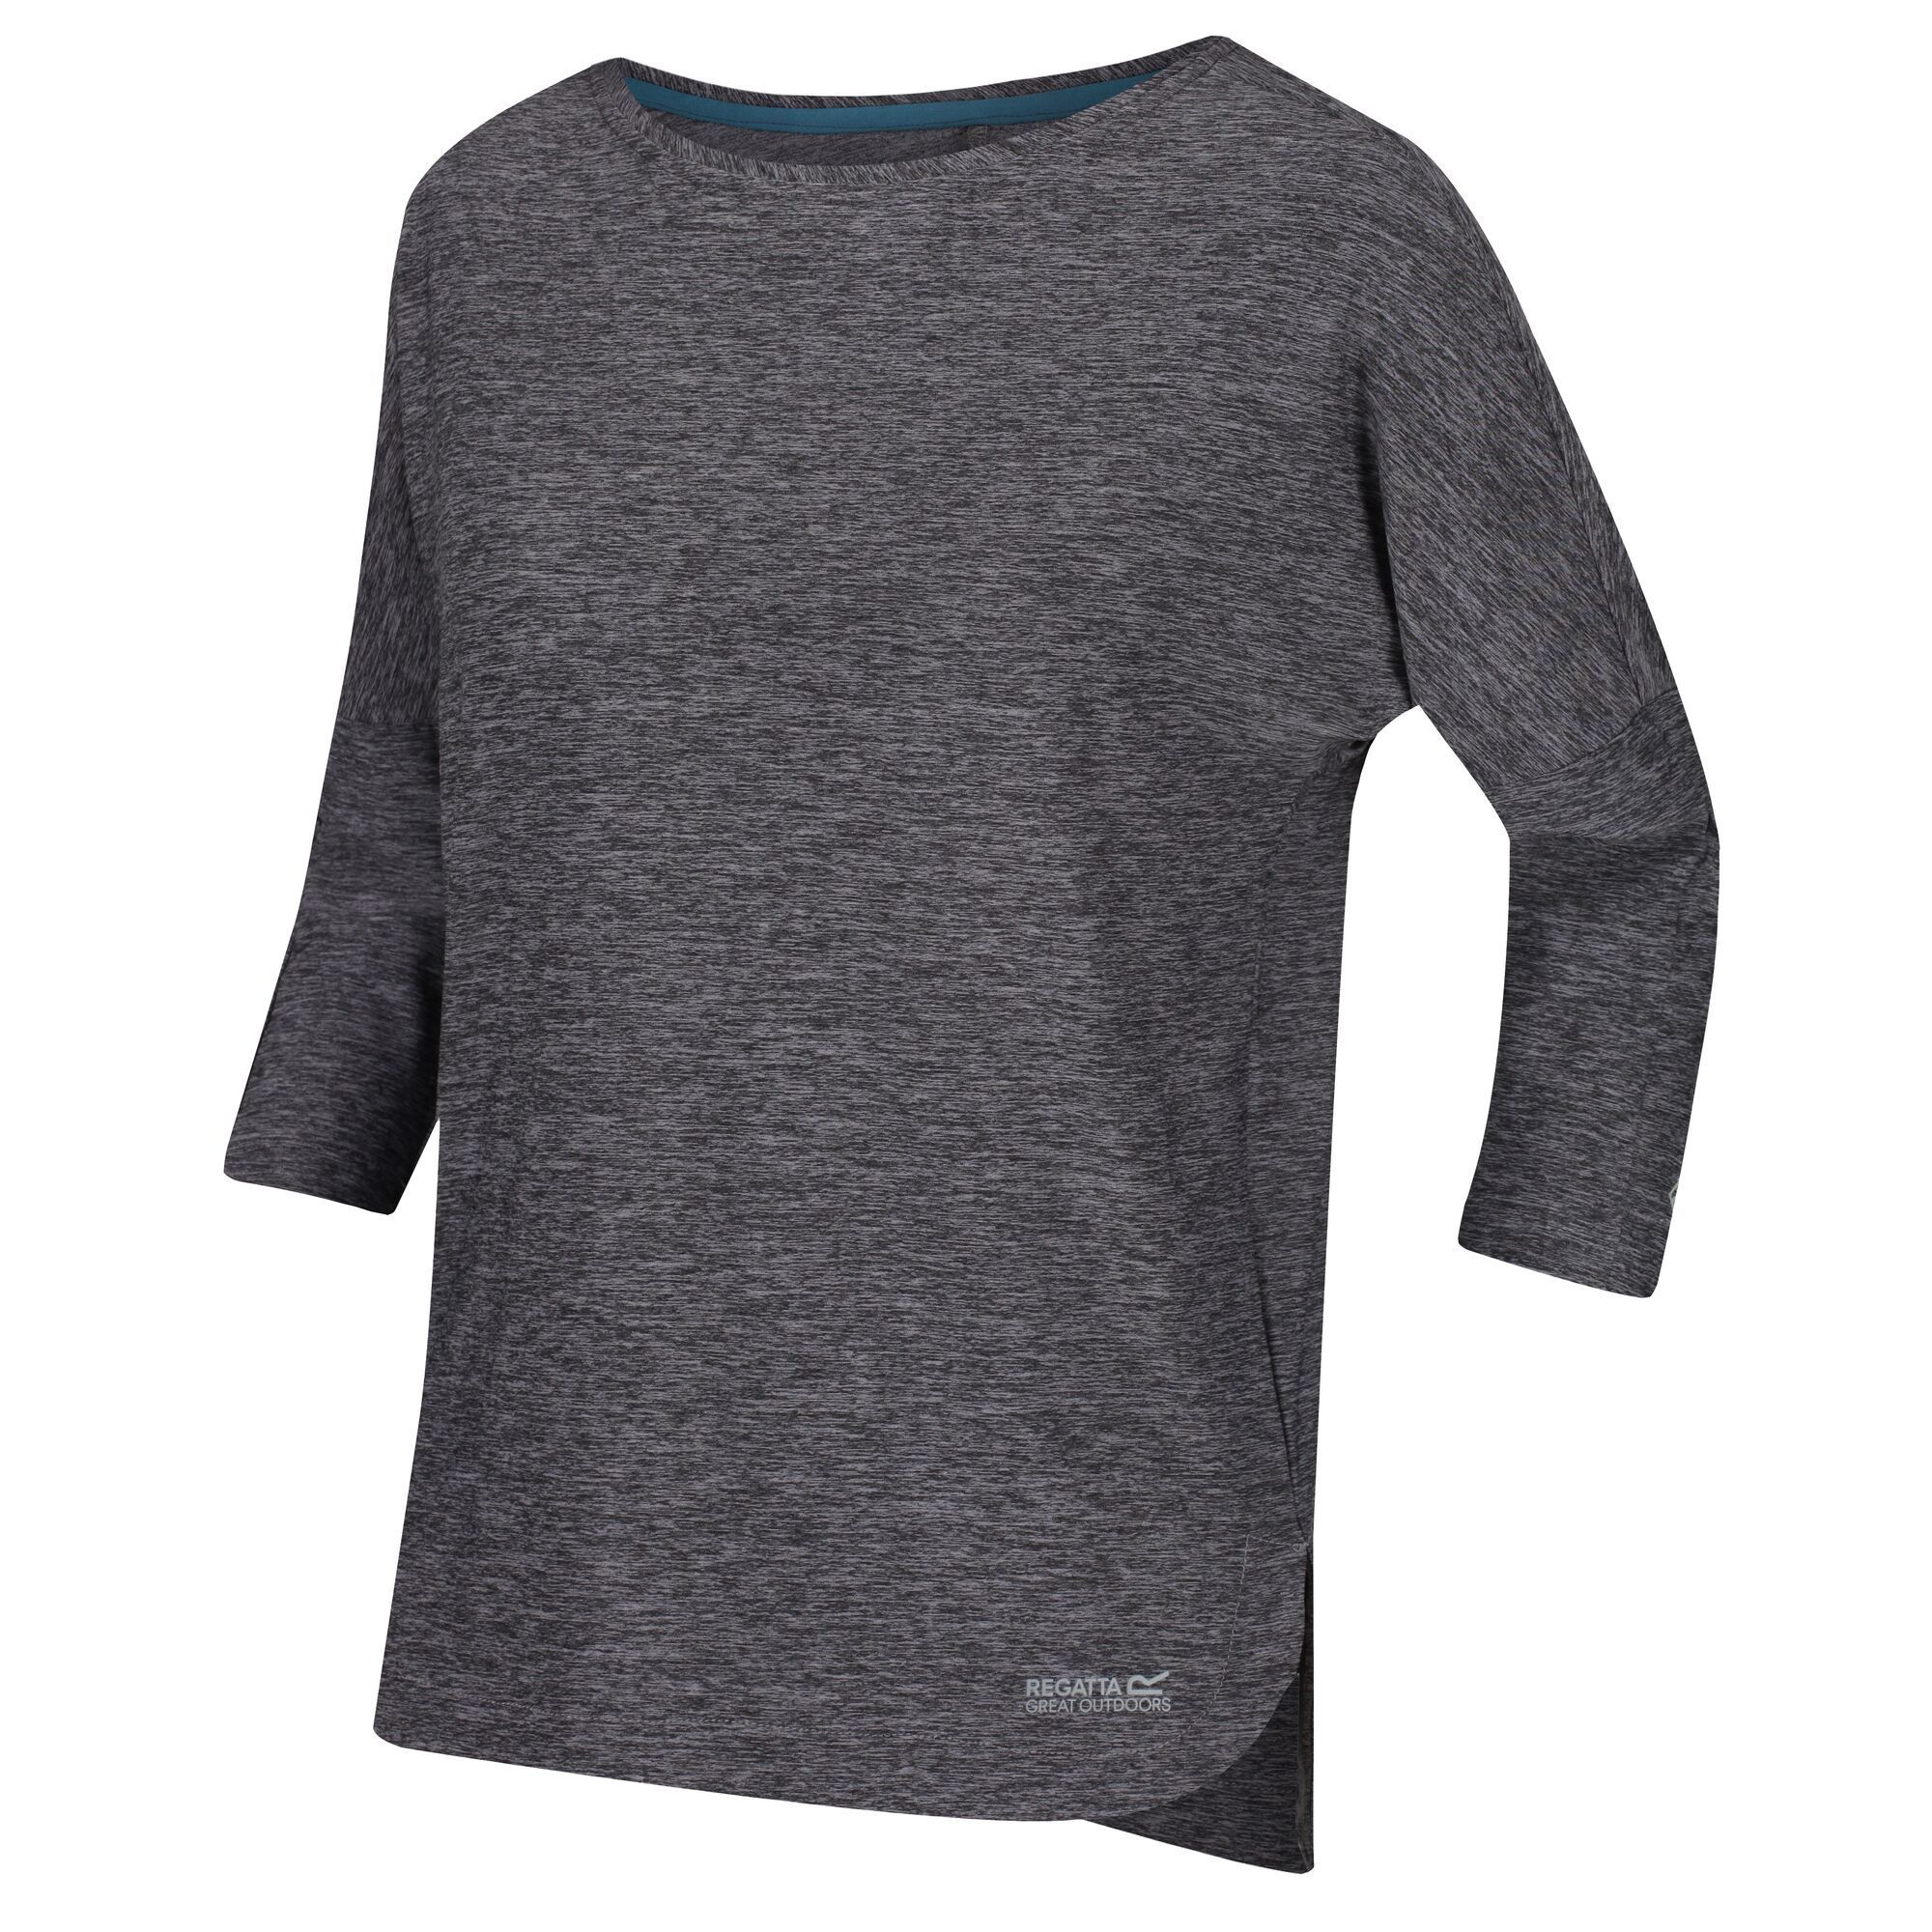 Material: 92% polyester & 8% elastane marl fabric. 3/4 length sleeve. Good wicking performance. Round neckline. Relaxed fit.